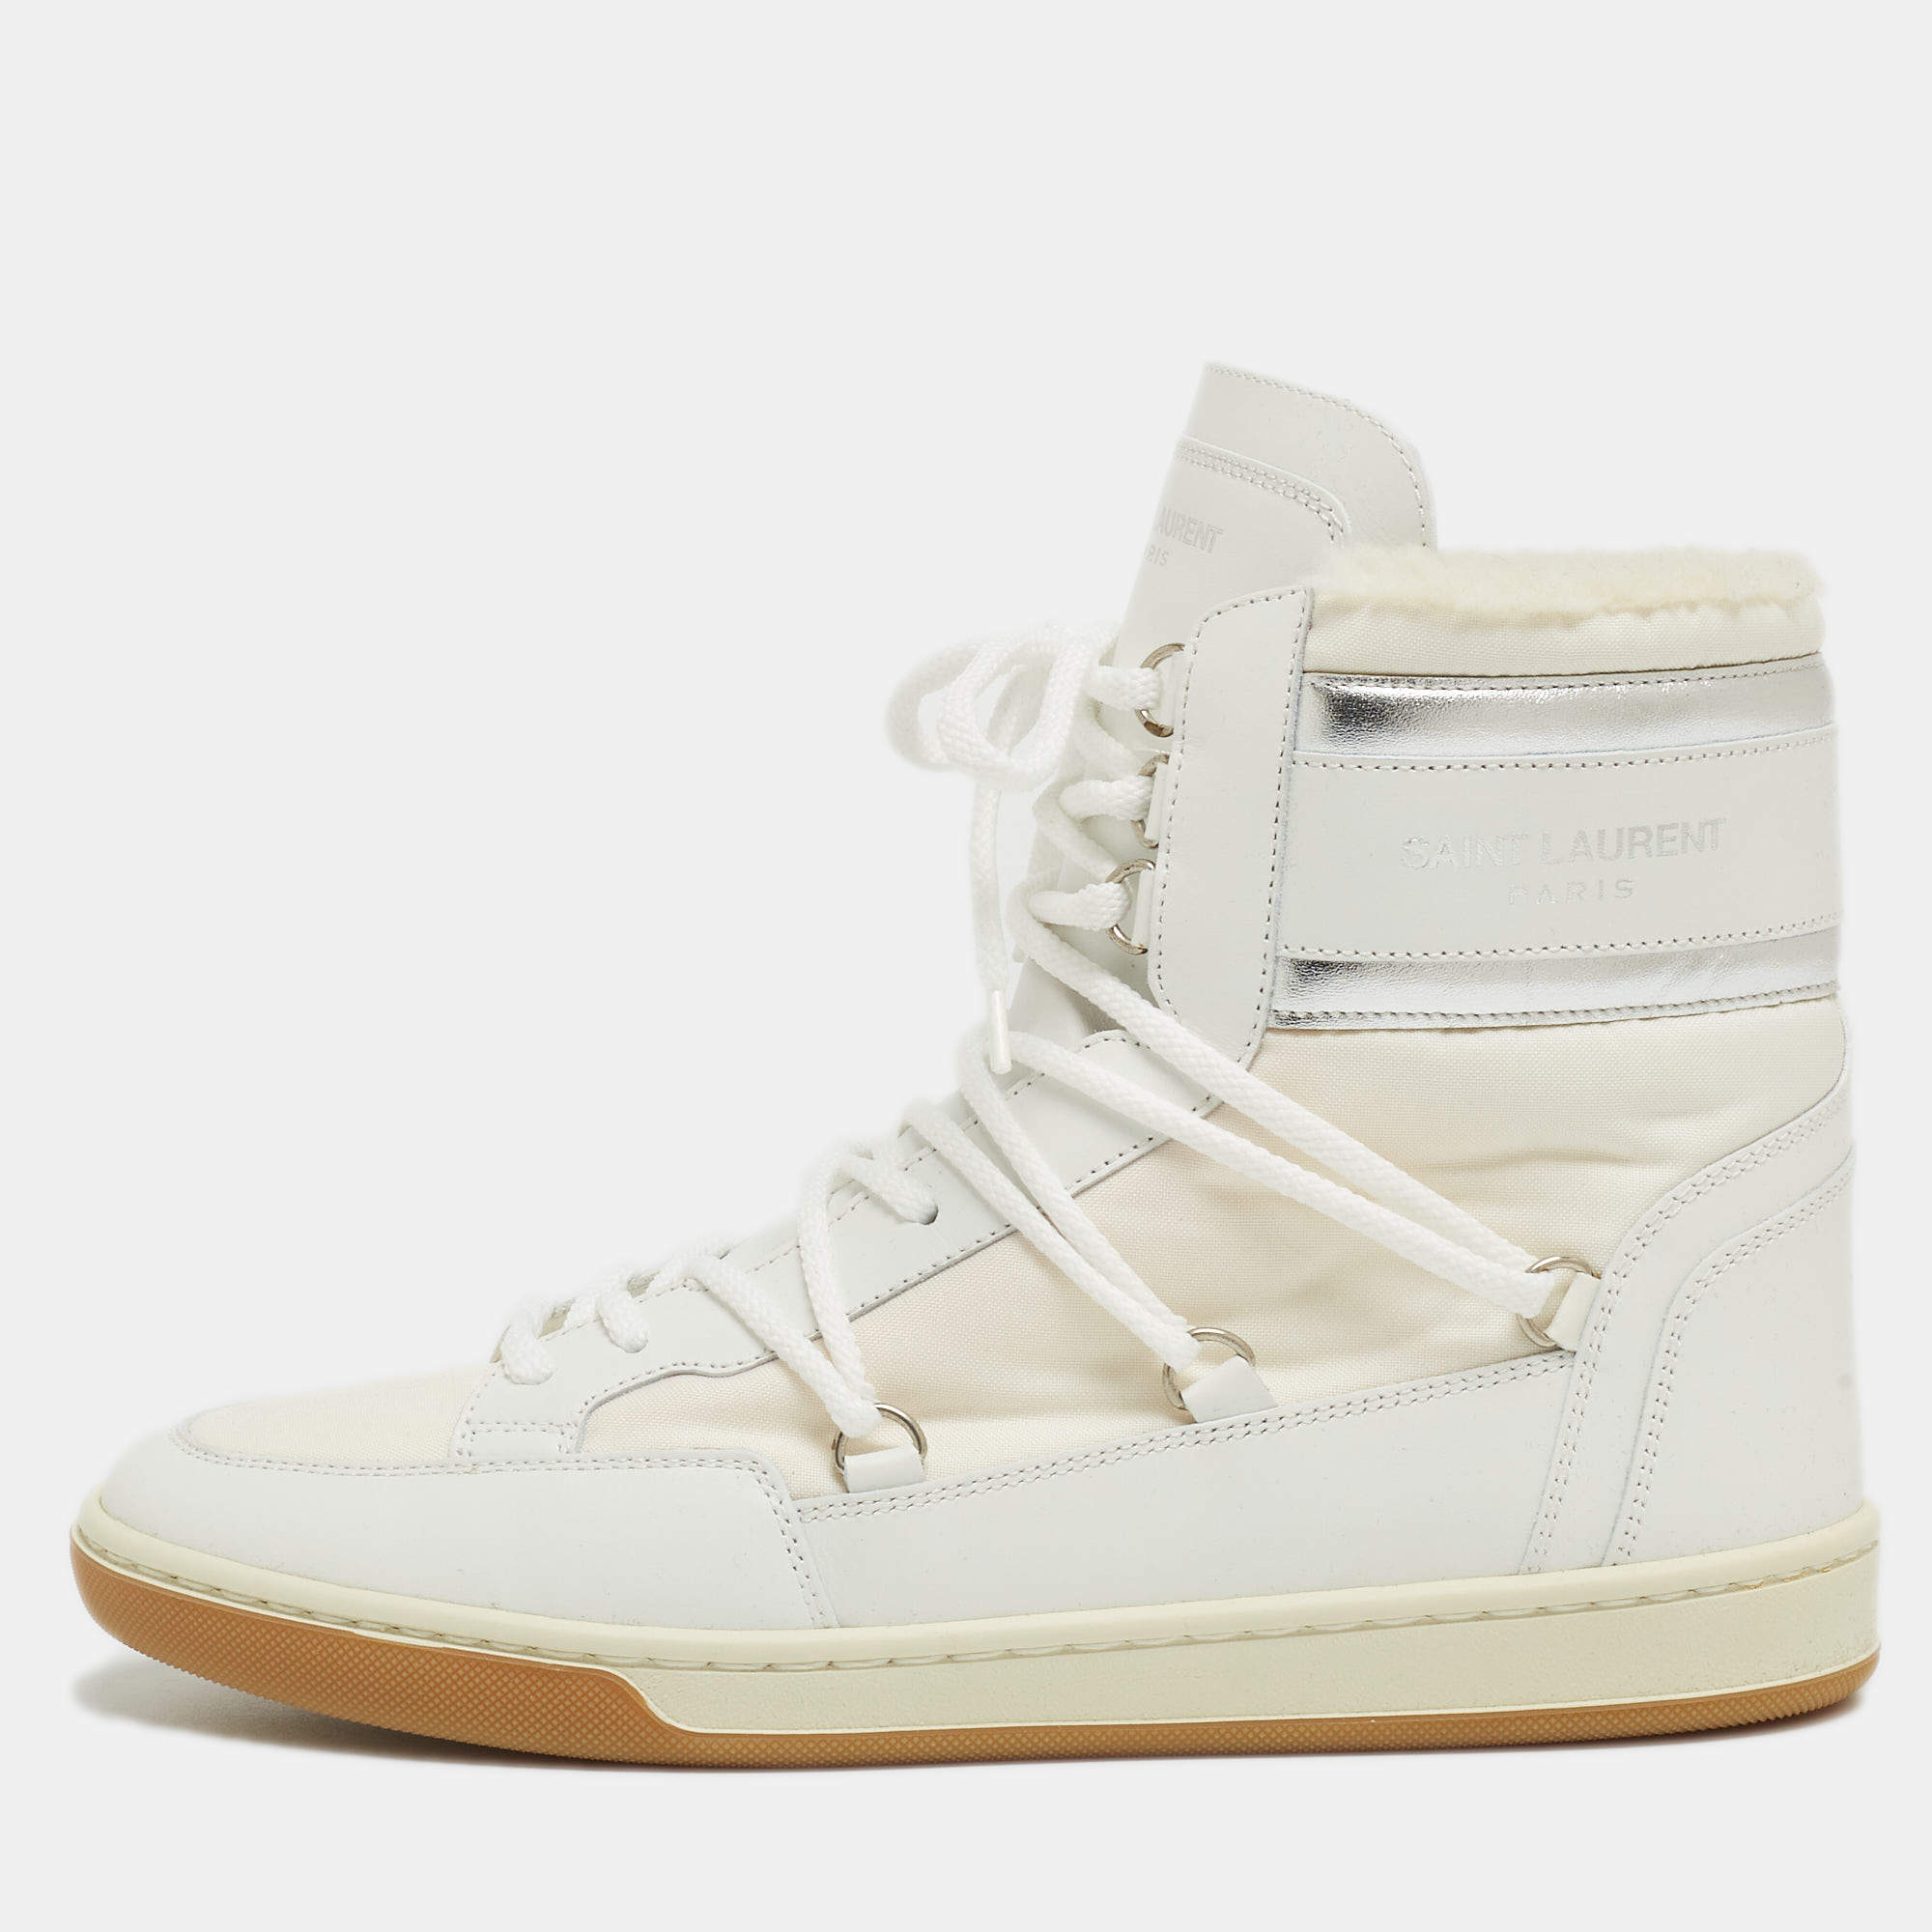 Saint Laurent White Fabric and Leather High Top Sneakers Size 39.5